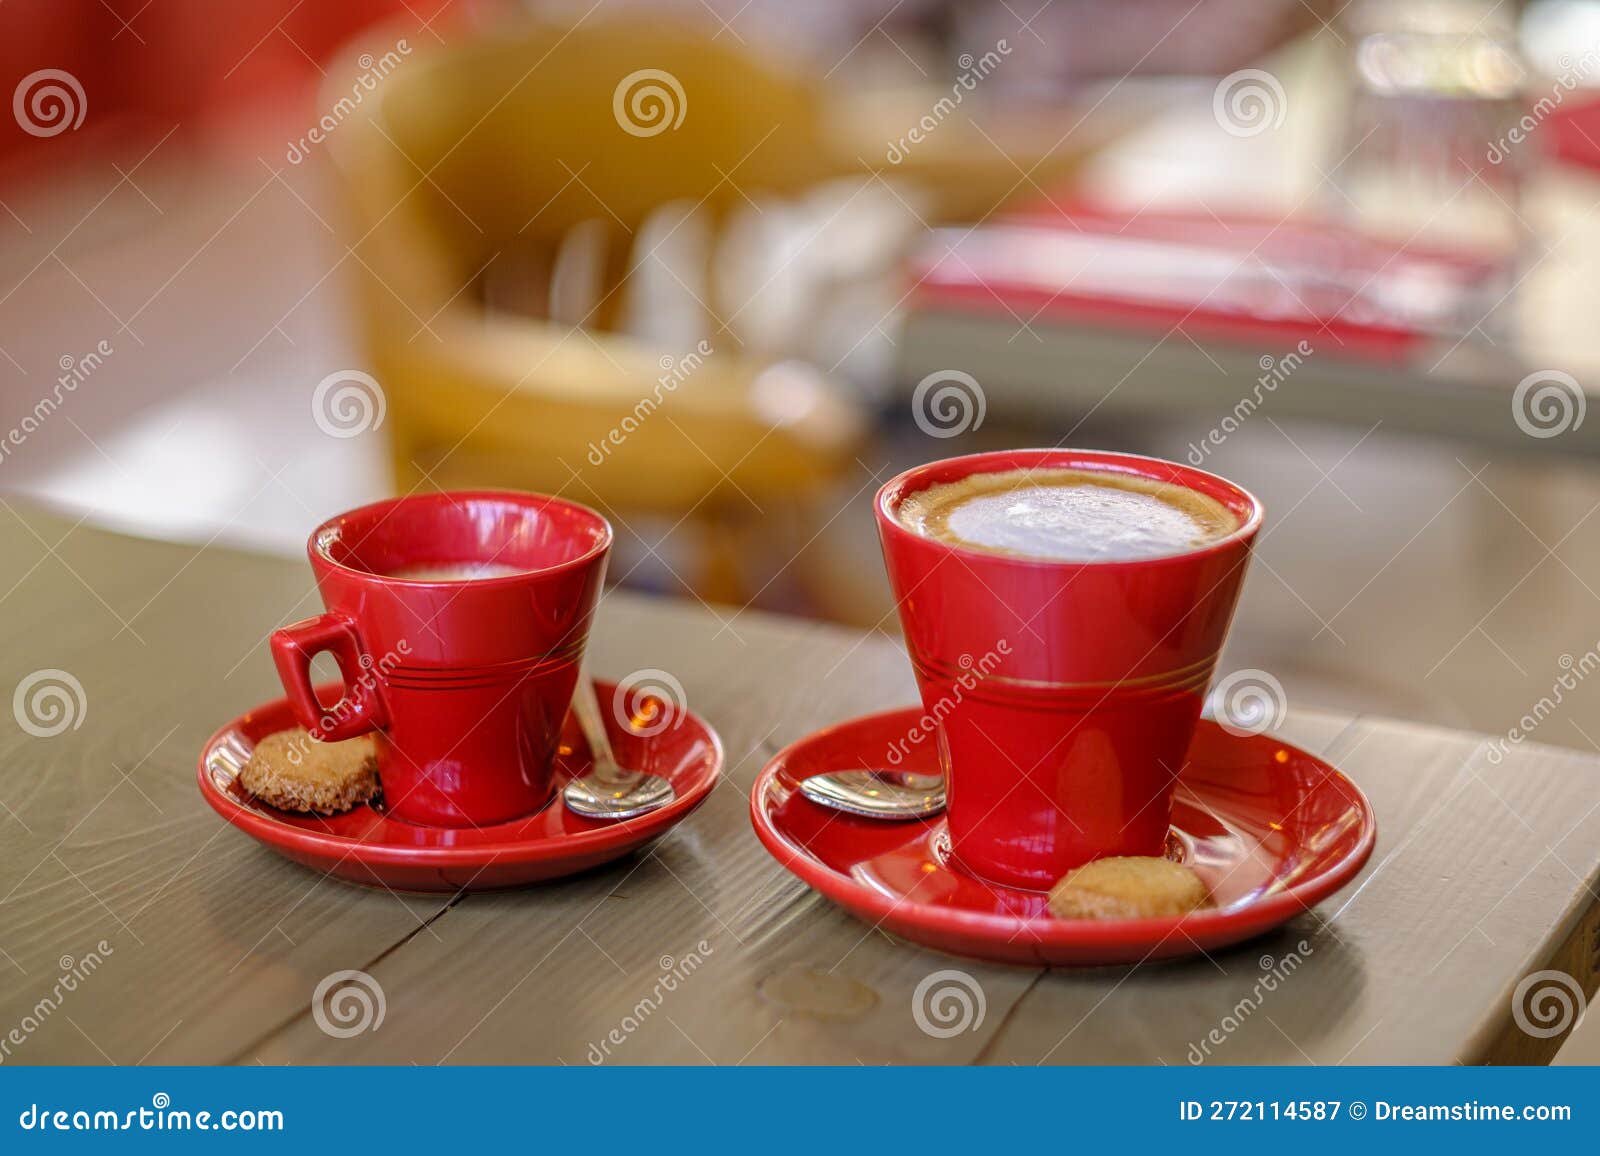 two red cups of coffee with a biscuit.